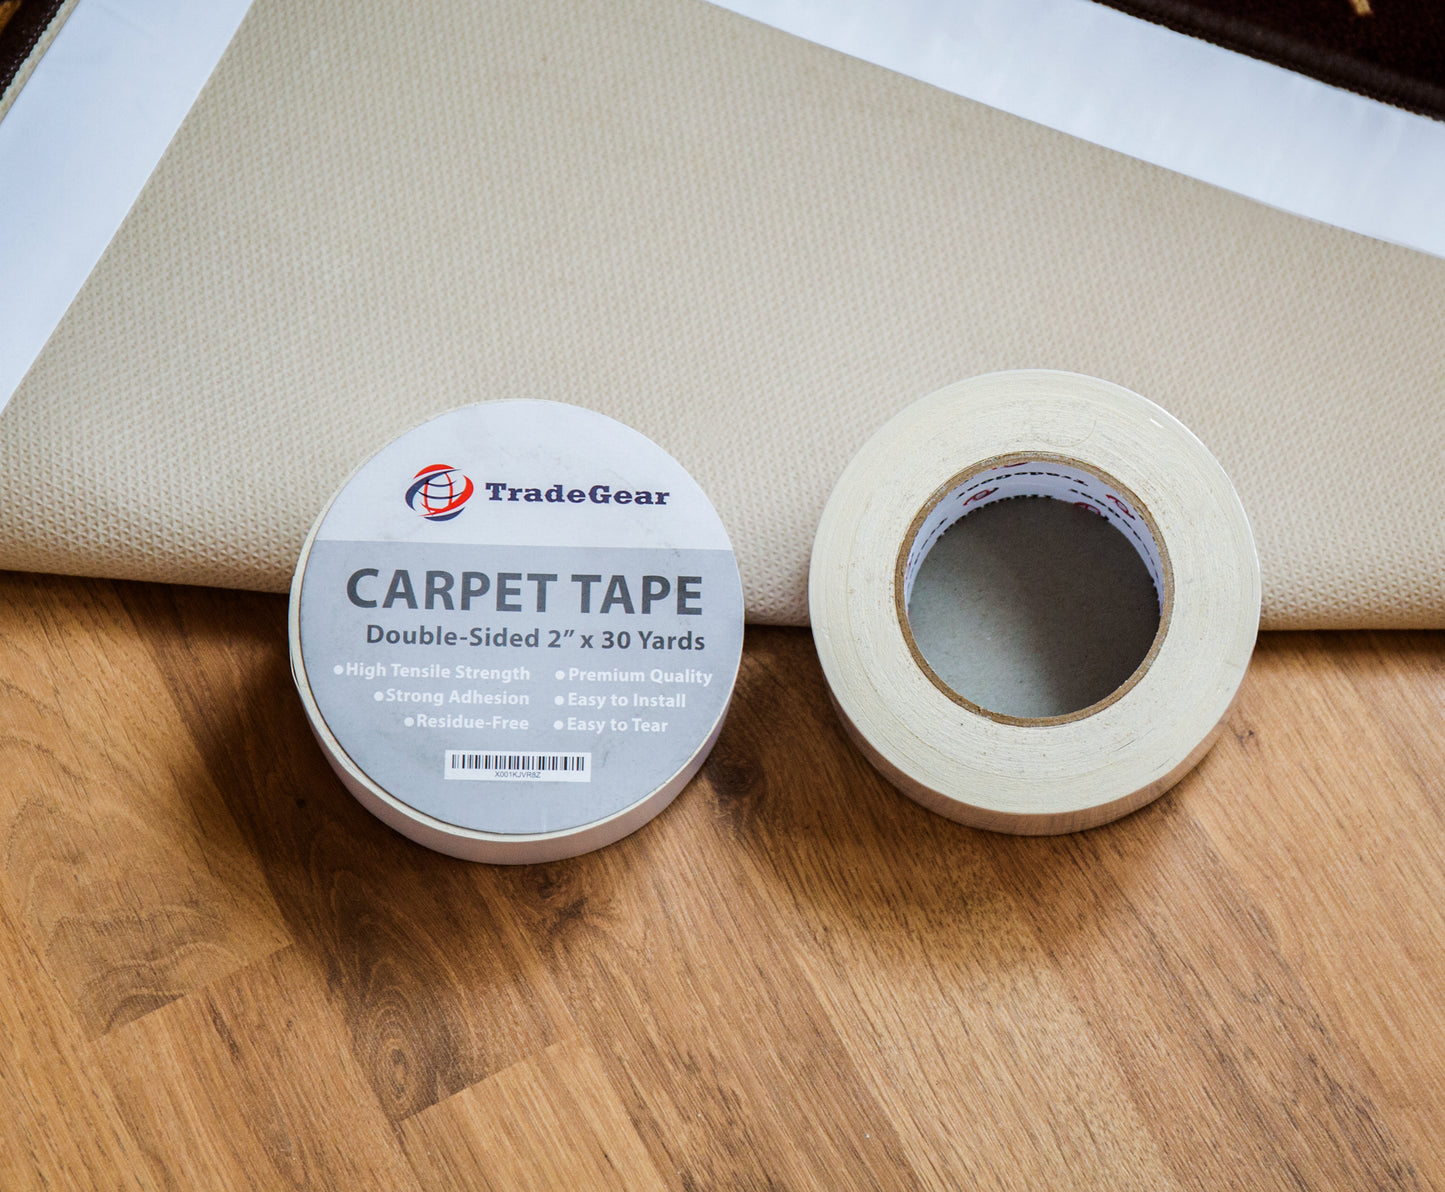 TradeGear Double Sided Carpet Tape - 2” x 30 Yards High Tensile Strength Rug Tape, Strong Adhesion, Durable, Residue Free, Easy to Install & Peel Off - TradeGear